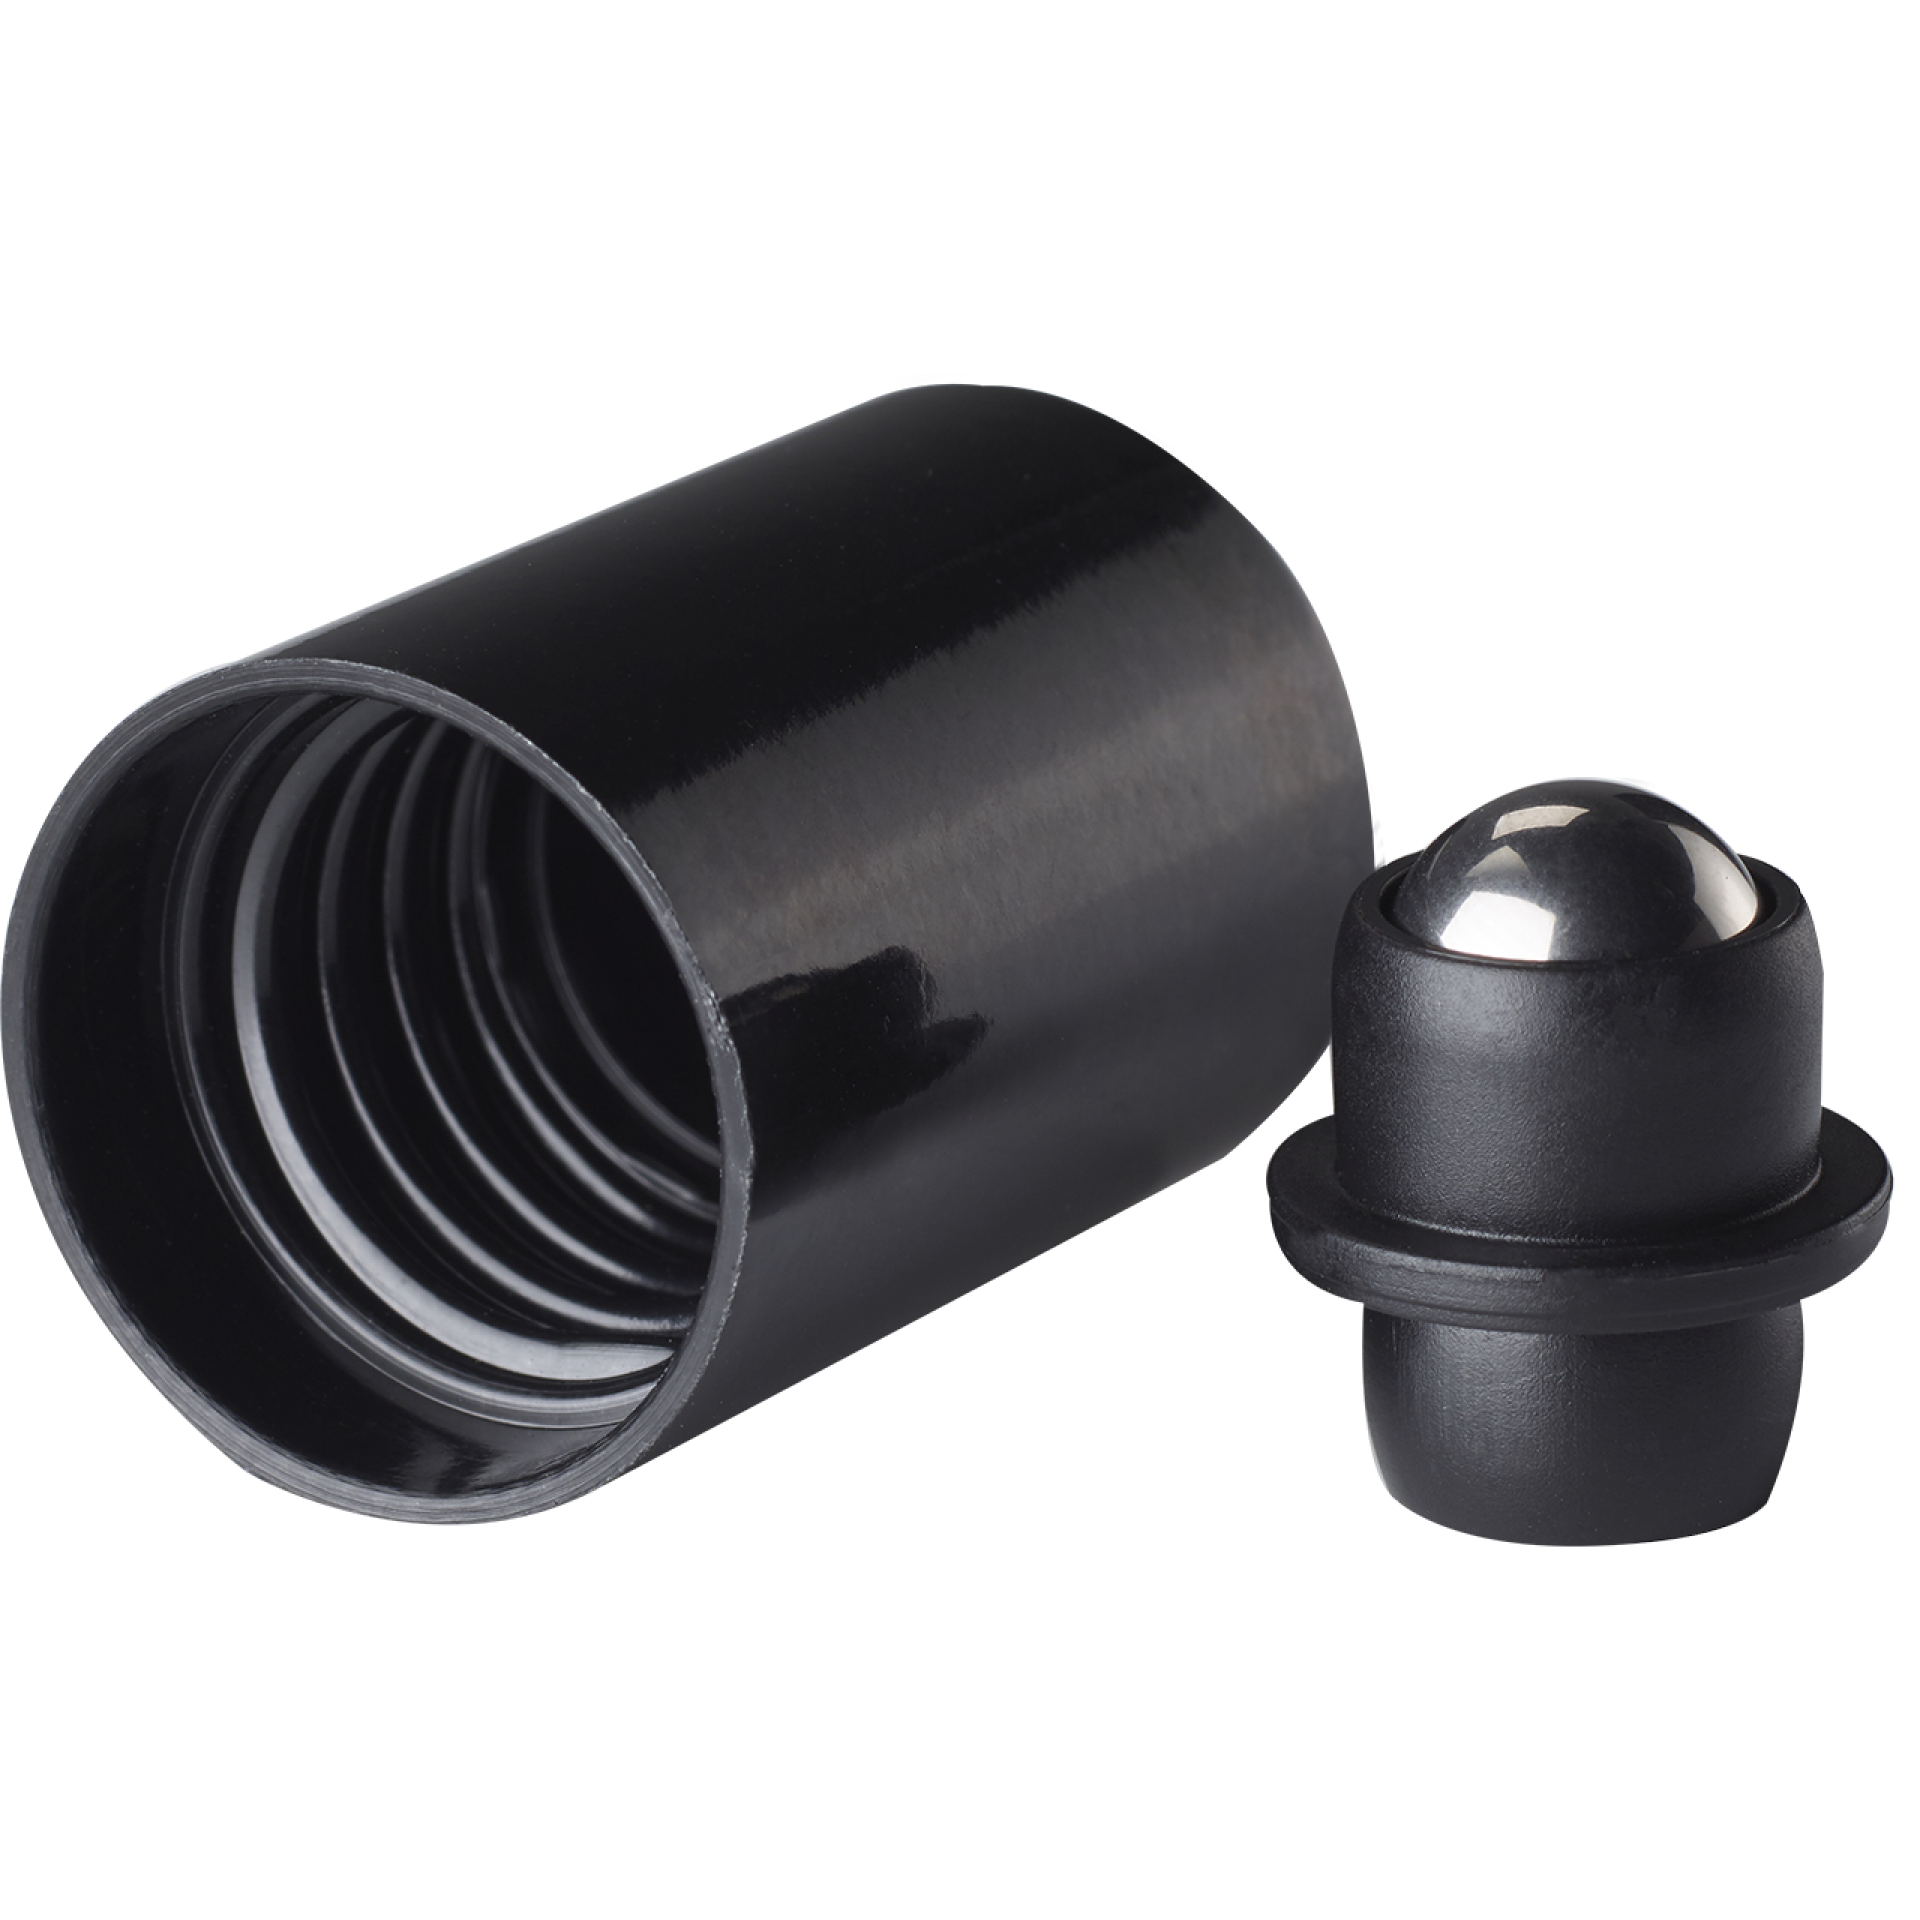 Roll-on cap DIN18, PP, black fitment with stainless steel ball, black cap for dropper bottles